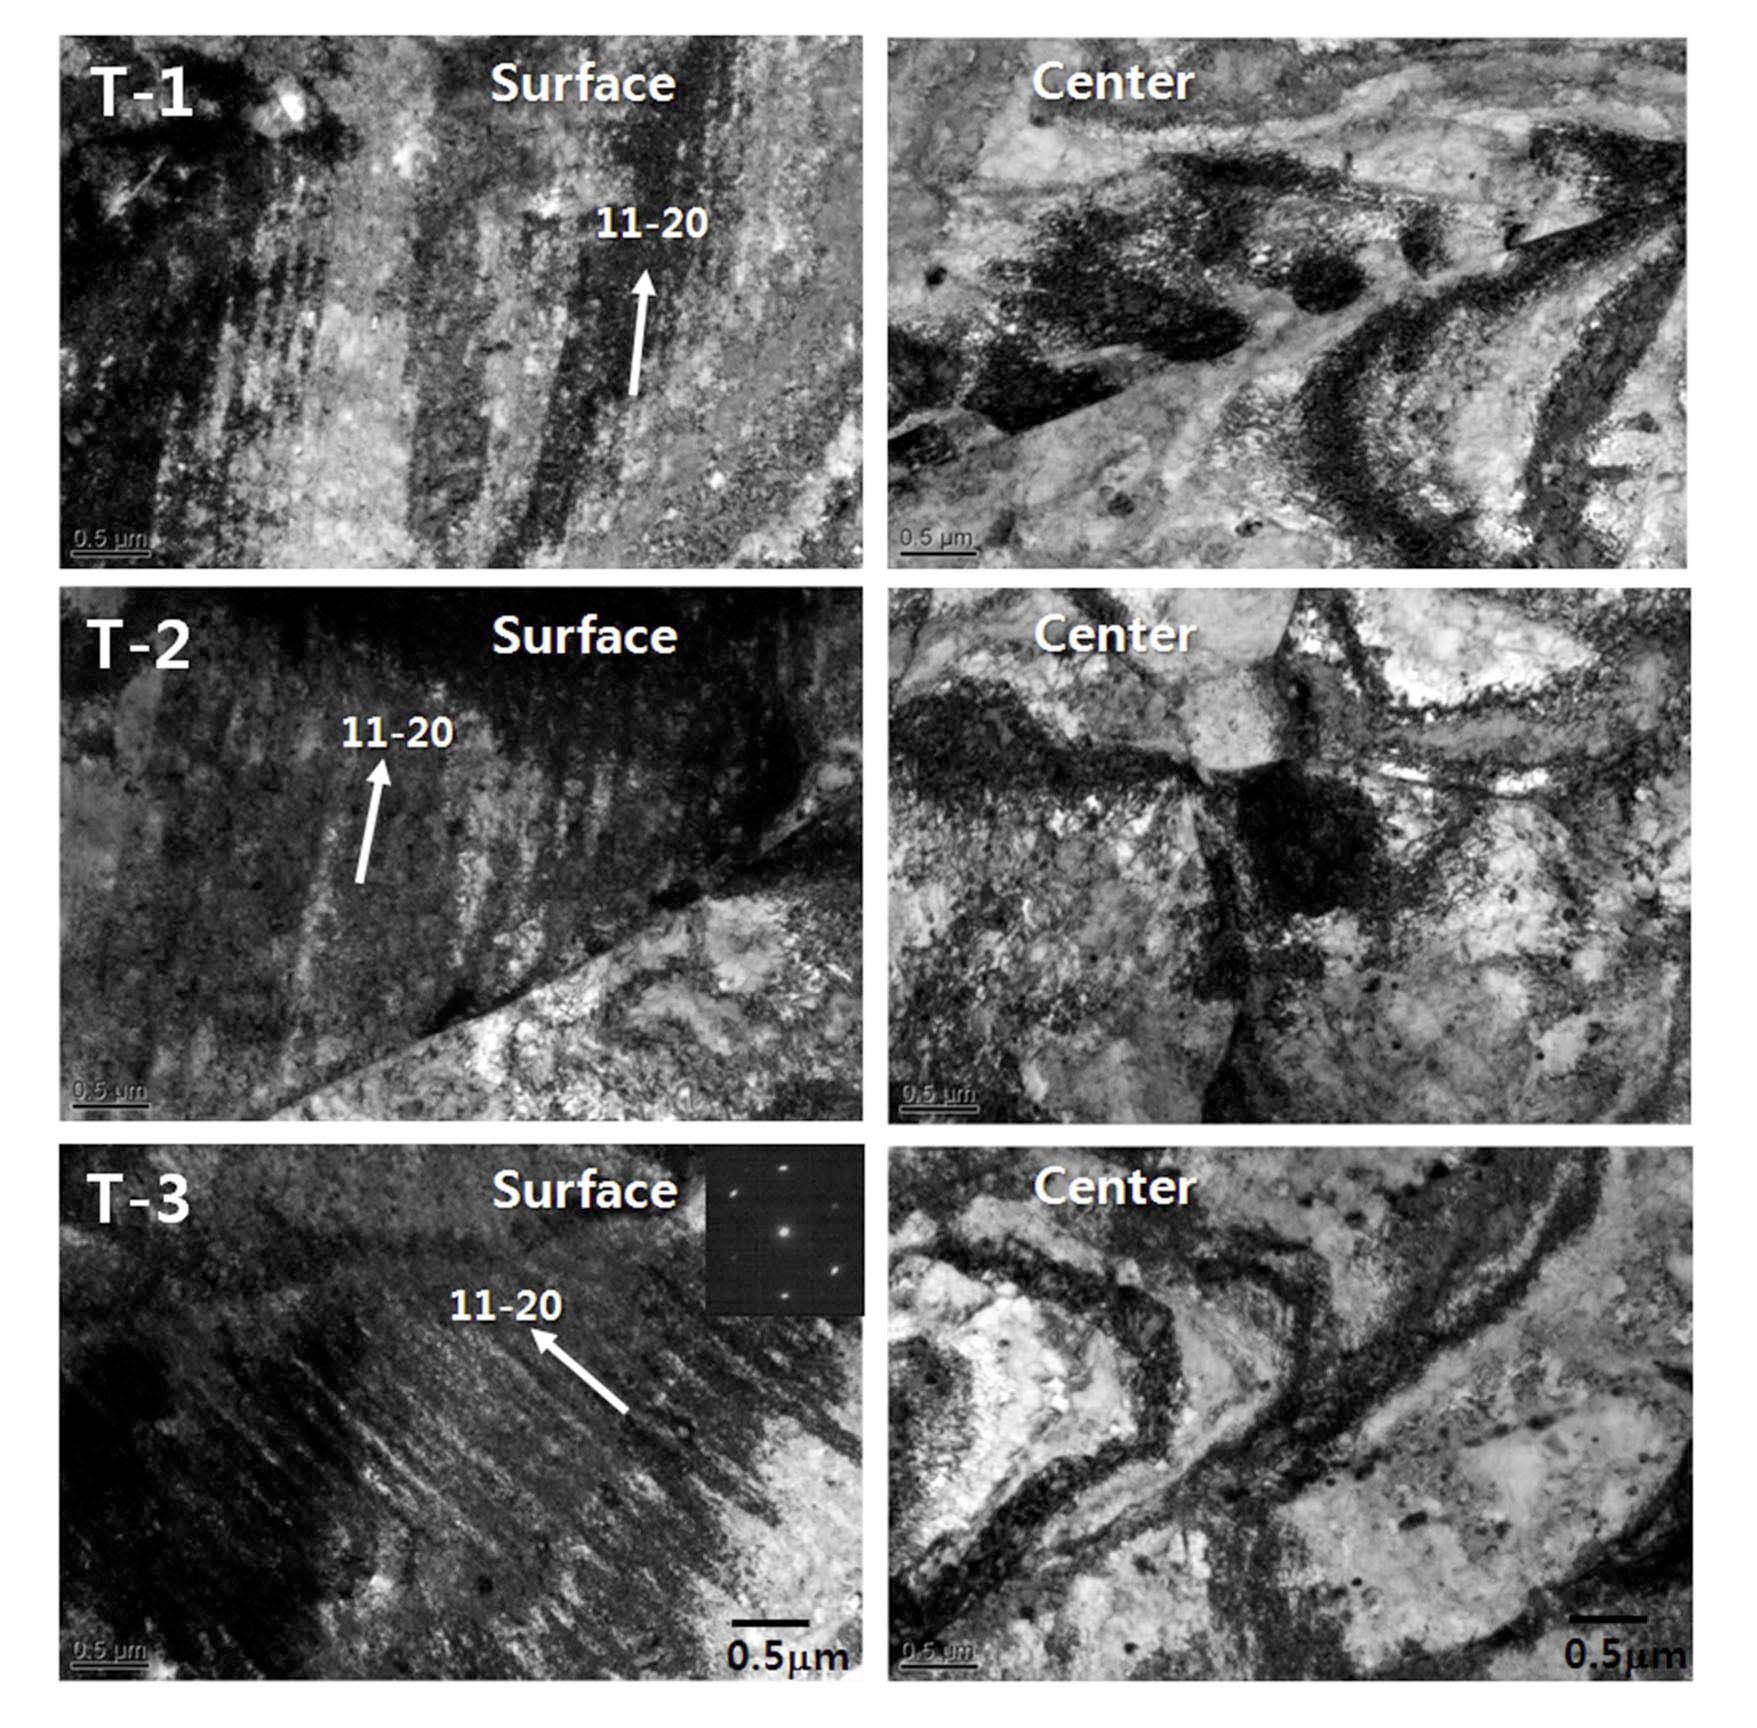 TEM Observation on the Deformed Microstructure at the Fractured Region of T-1, T-2, and T-3 Alloy after the Repeated Tensile Tests